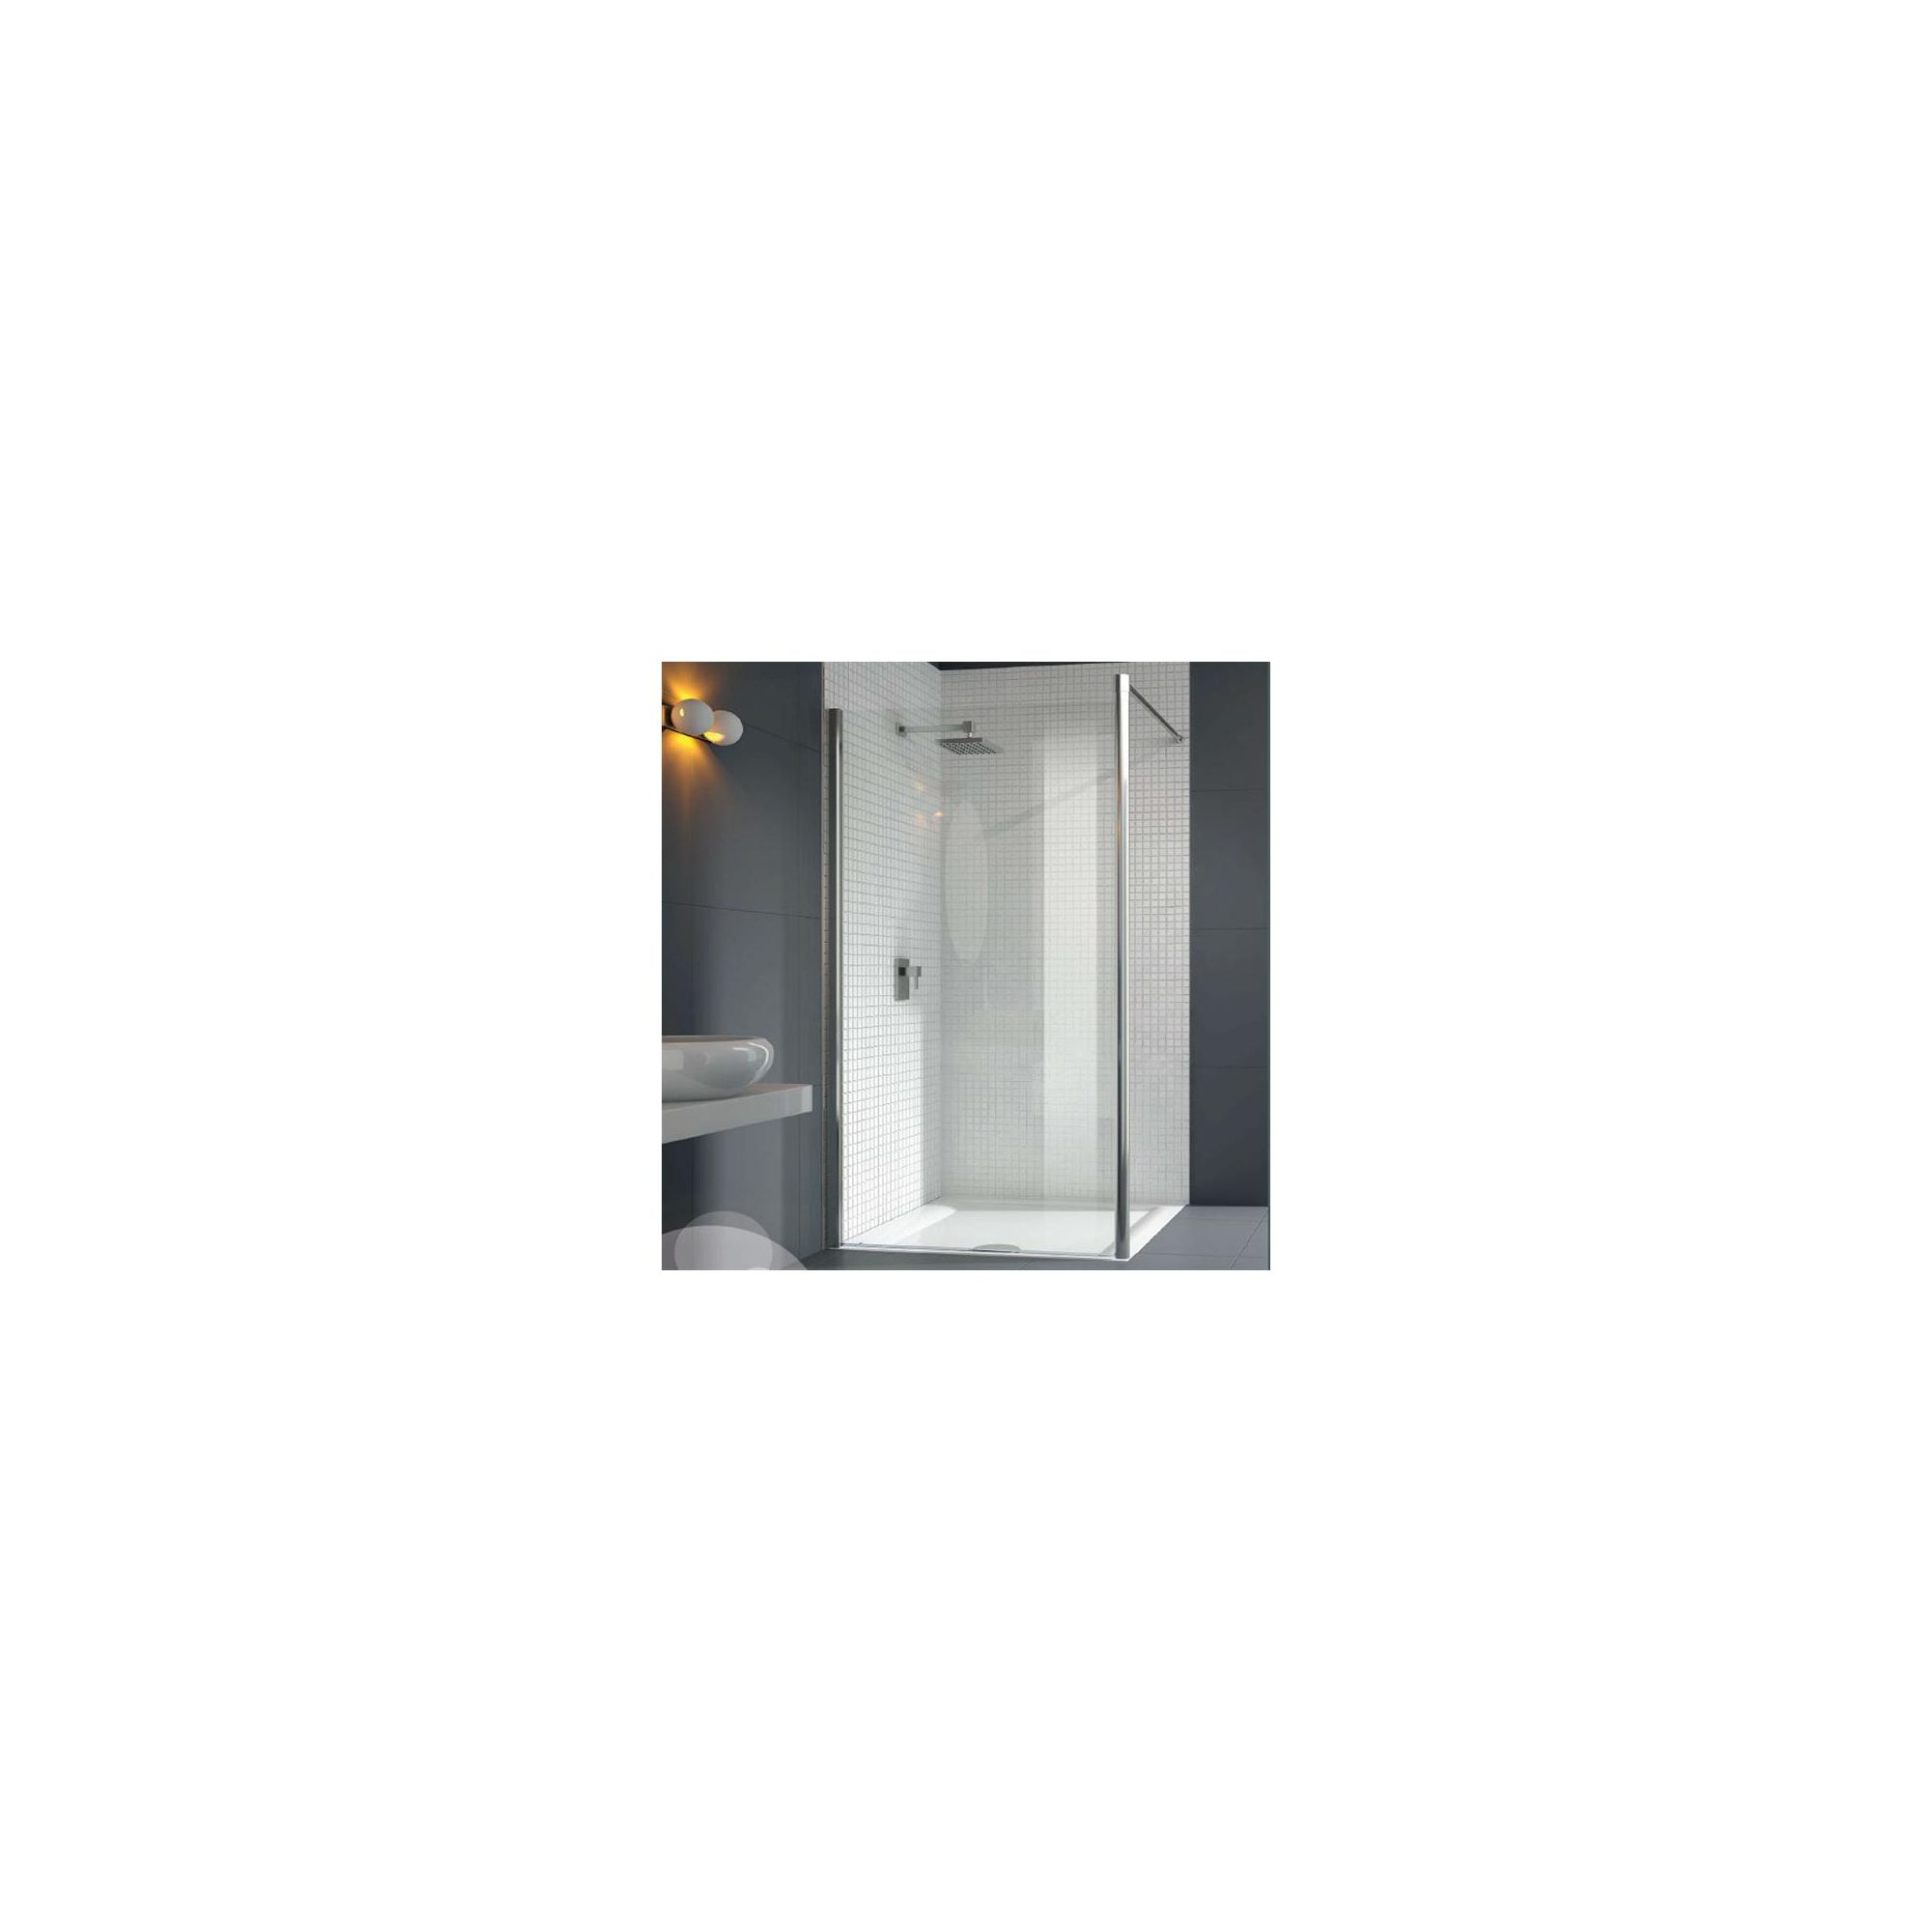 Merlyn Vivid Six Wet Room Shower Enclosure, 1000mm x 800mm, Horizontal Support Bar, Low Profile Tray, 6mm Glass at Tesco Direct